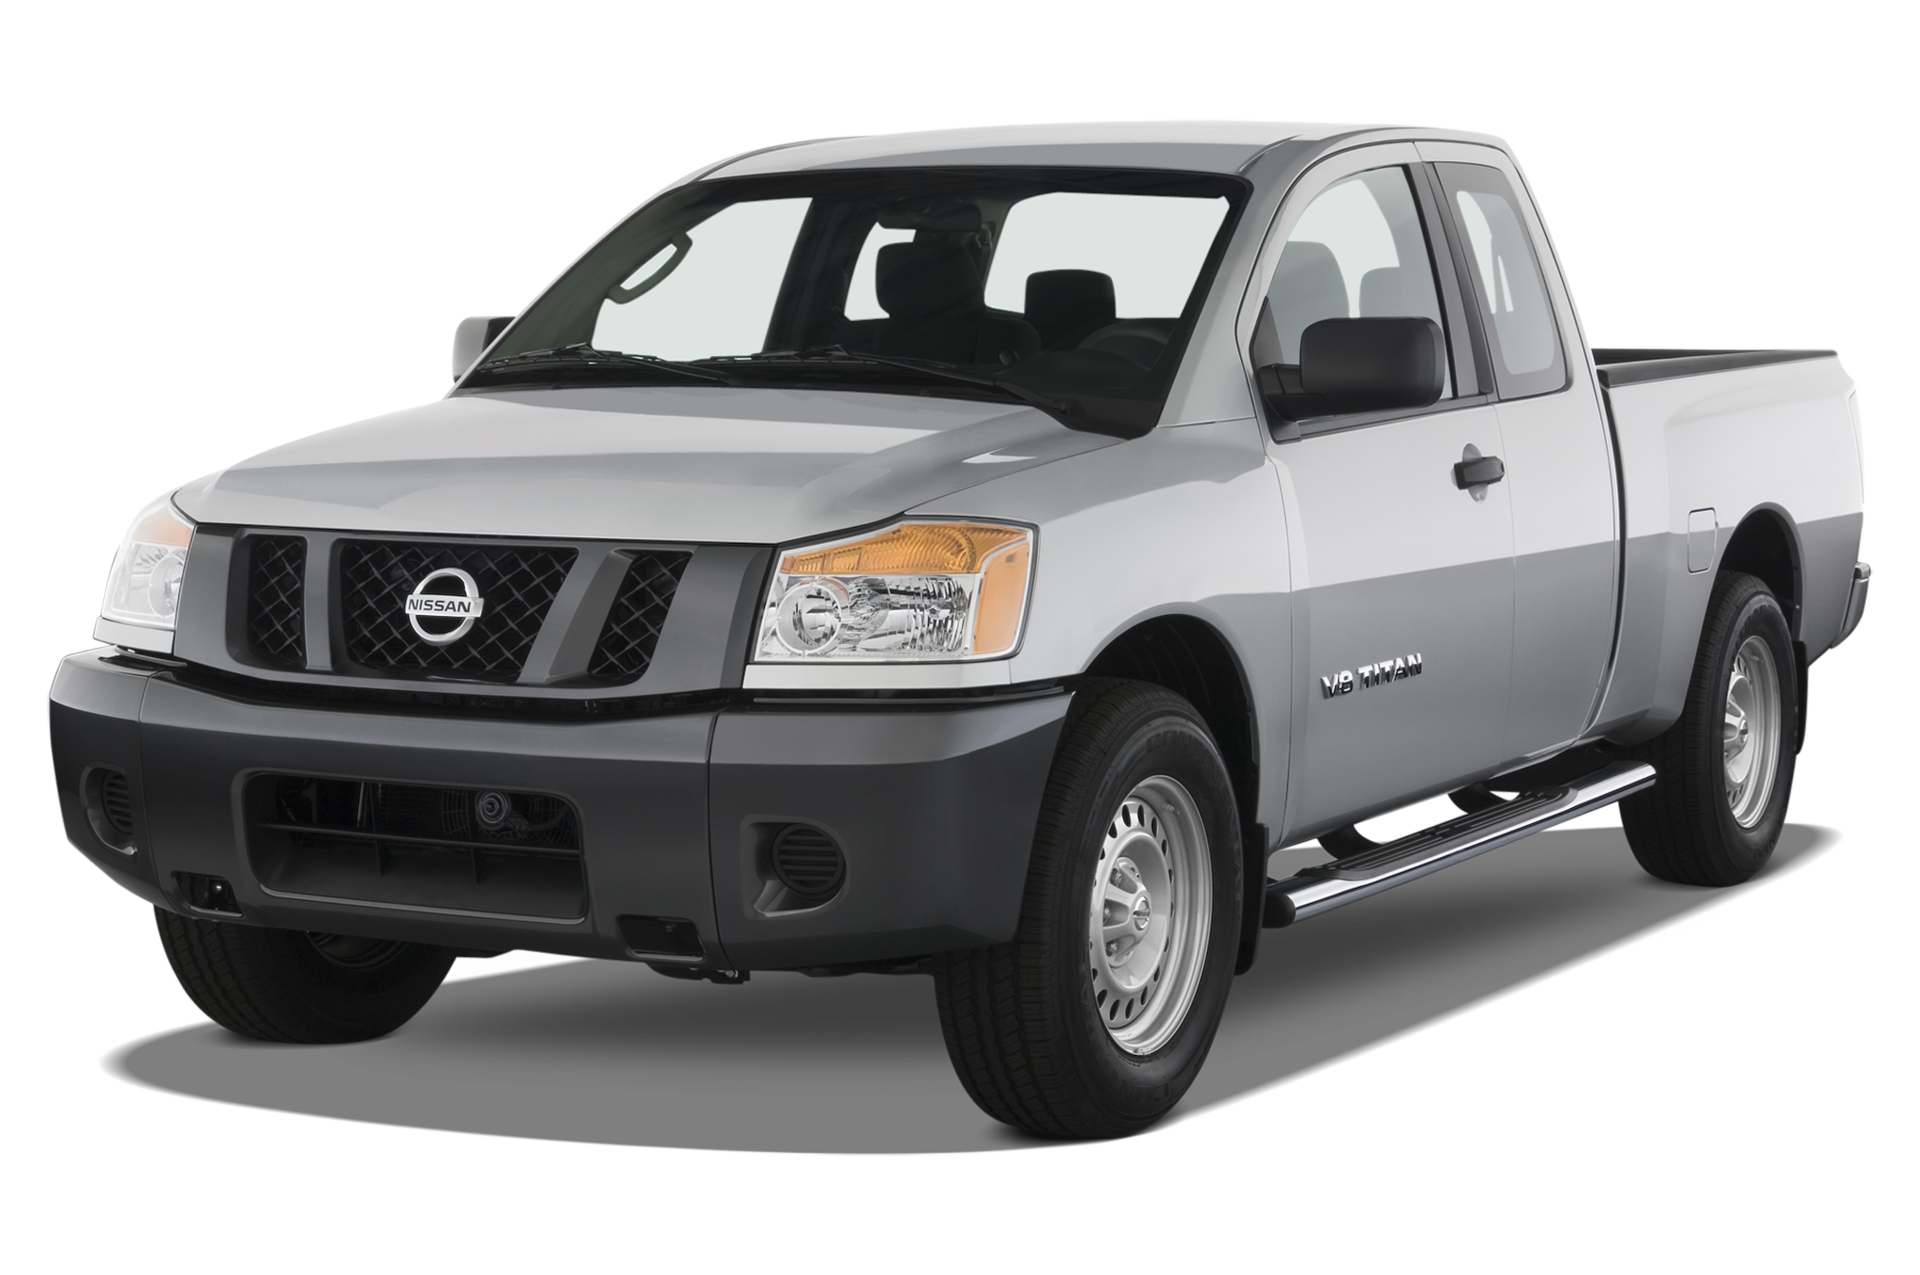 2011 Nissan Titan Prices, Reviews, and Photos - MotorTrend